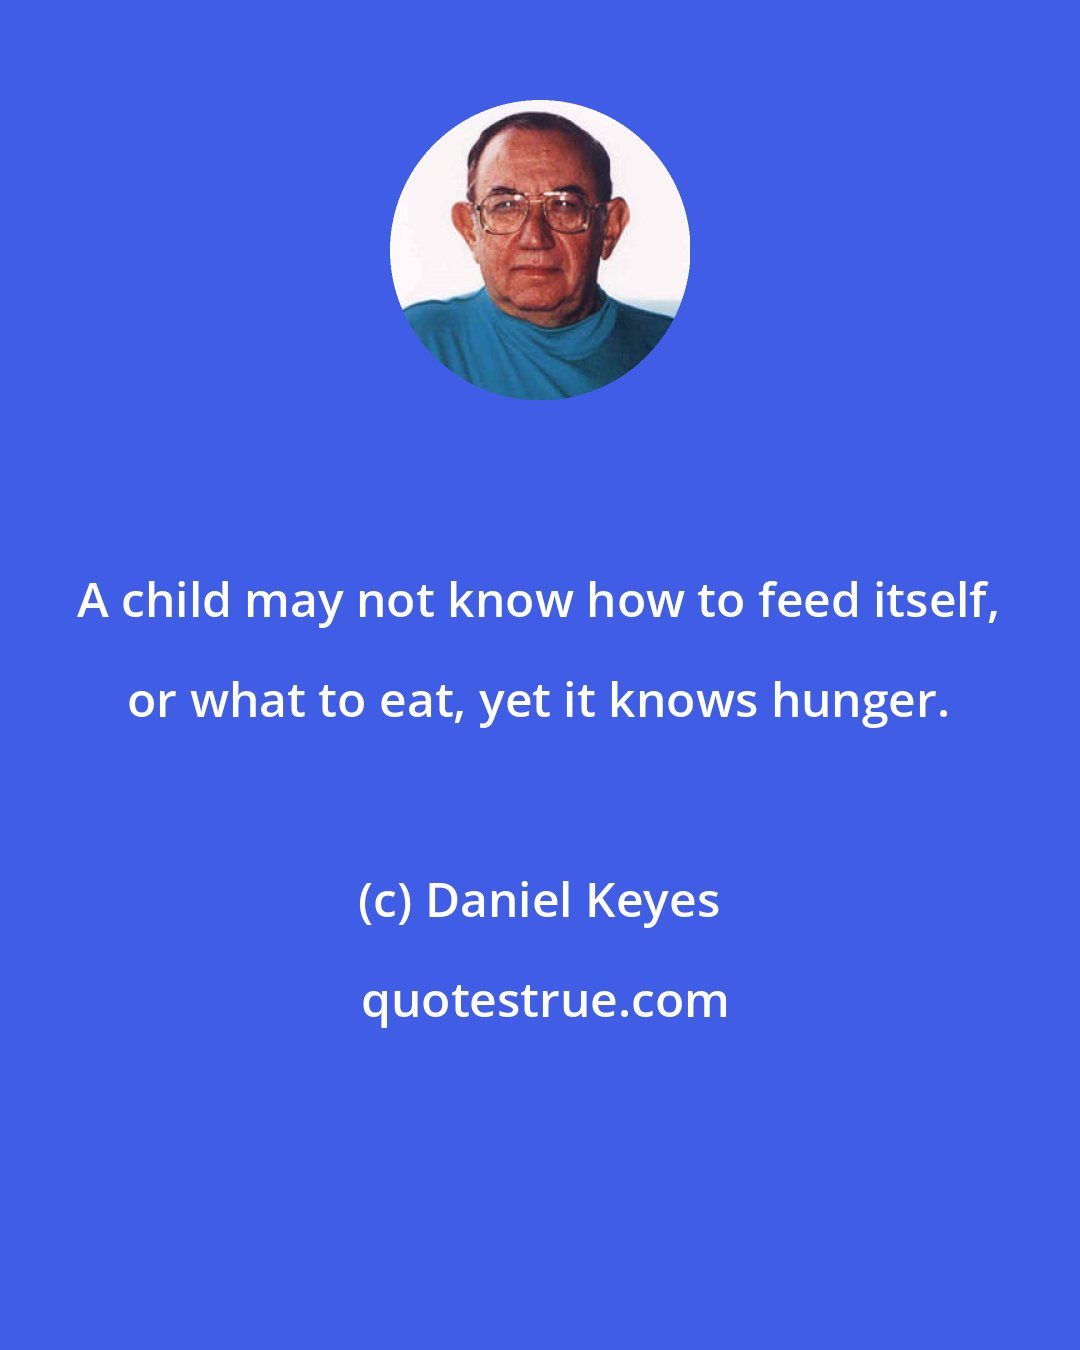 Daniel Keyes: A child may not know how to feed itself, or what to eat, yet it knows hunger.